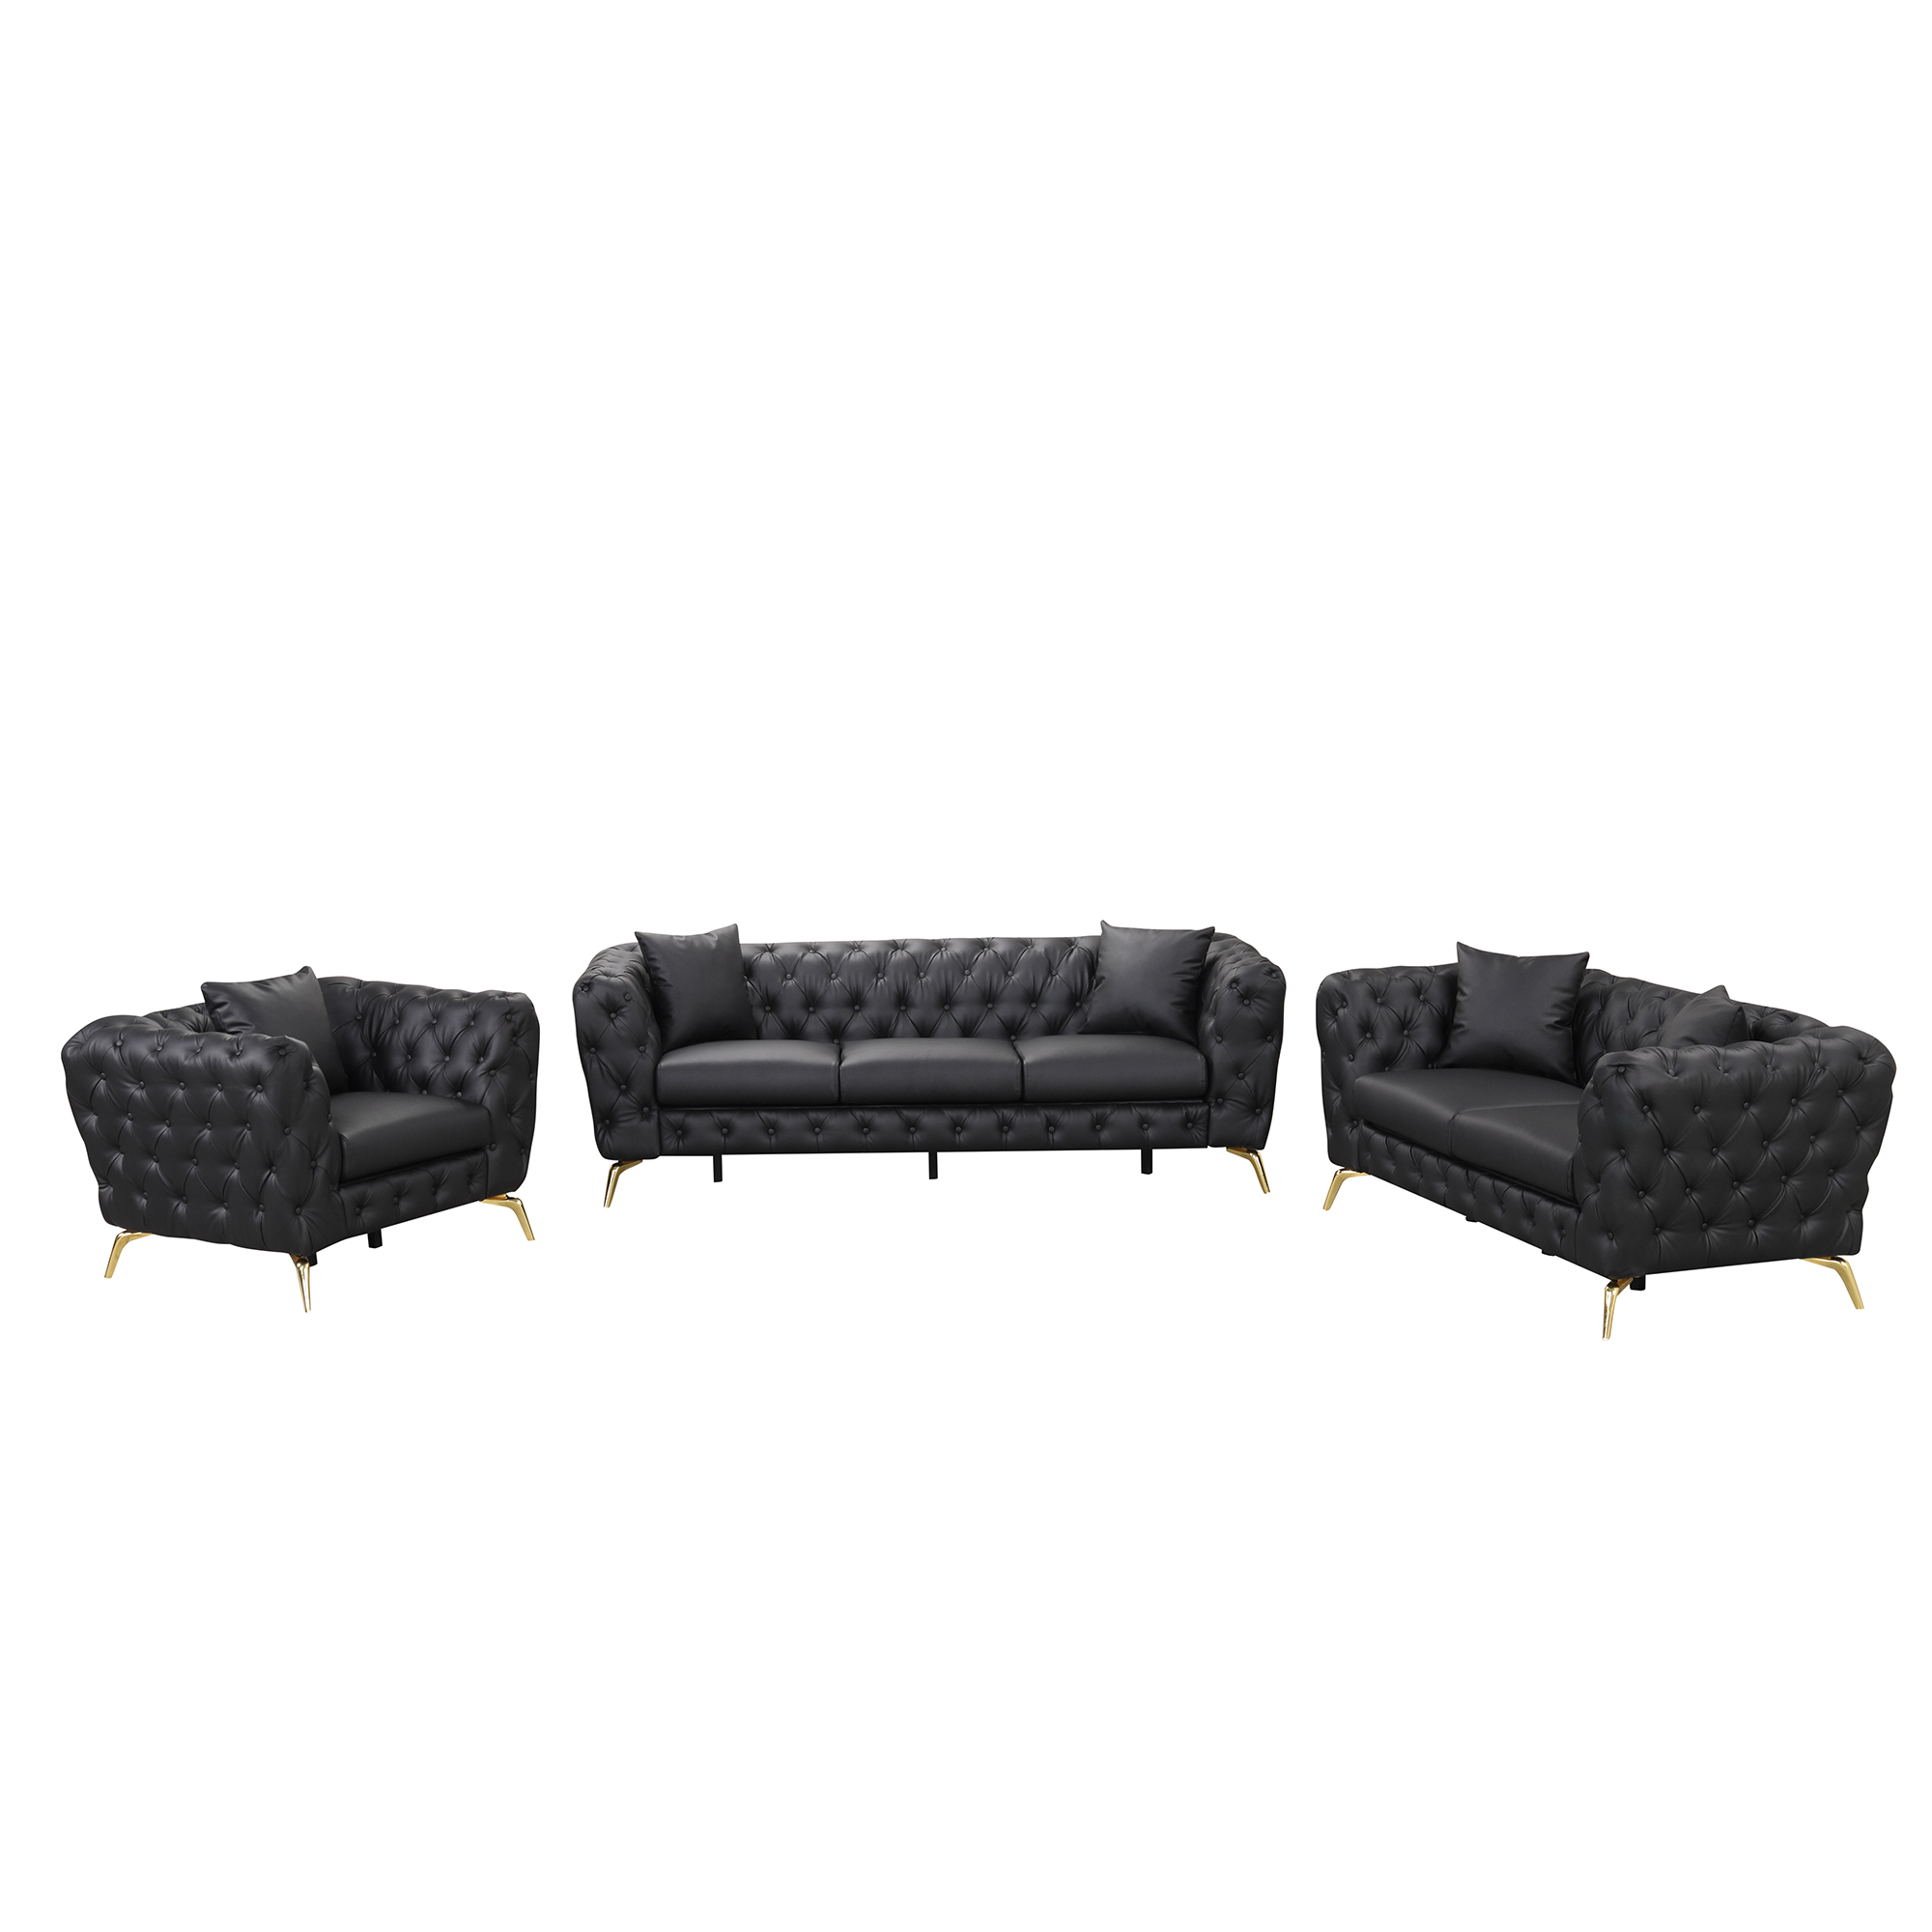 Modern Upholstered 3-Piece Sofa Sets with Sturdy Metal Legs - SG000990AAB